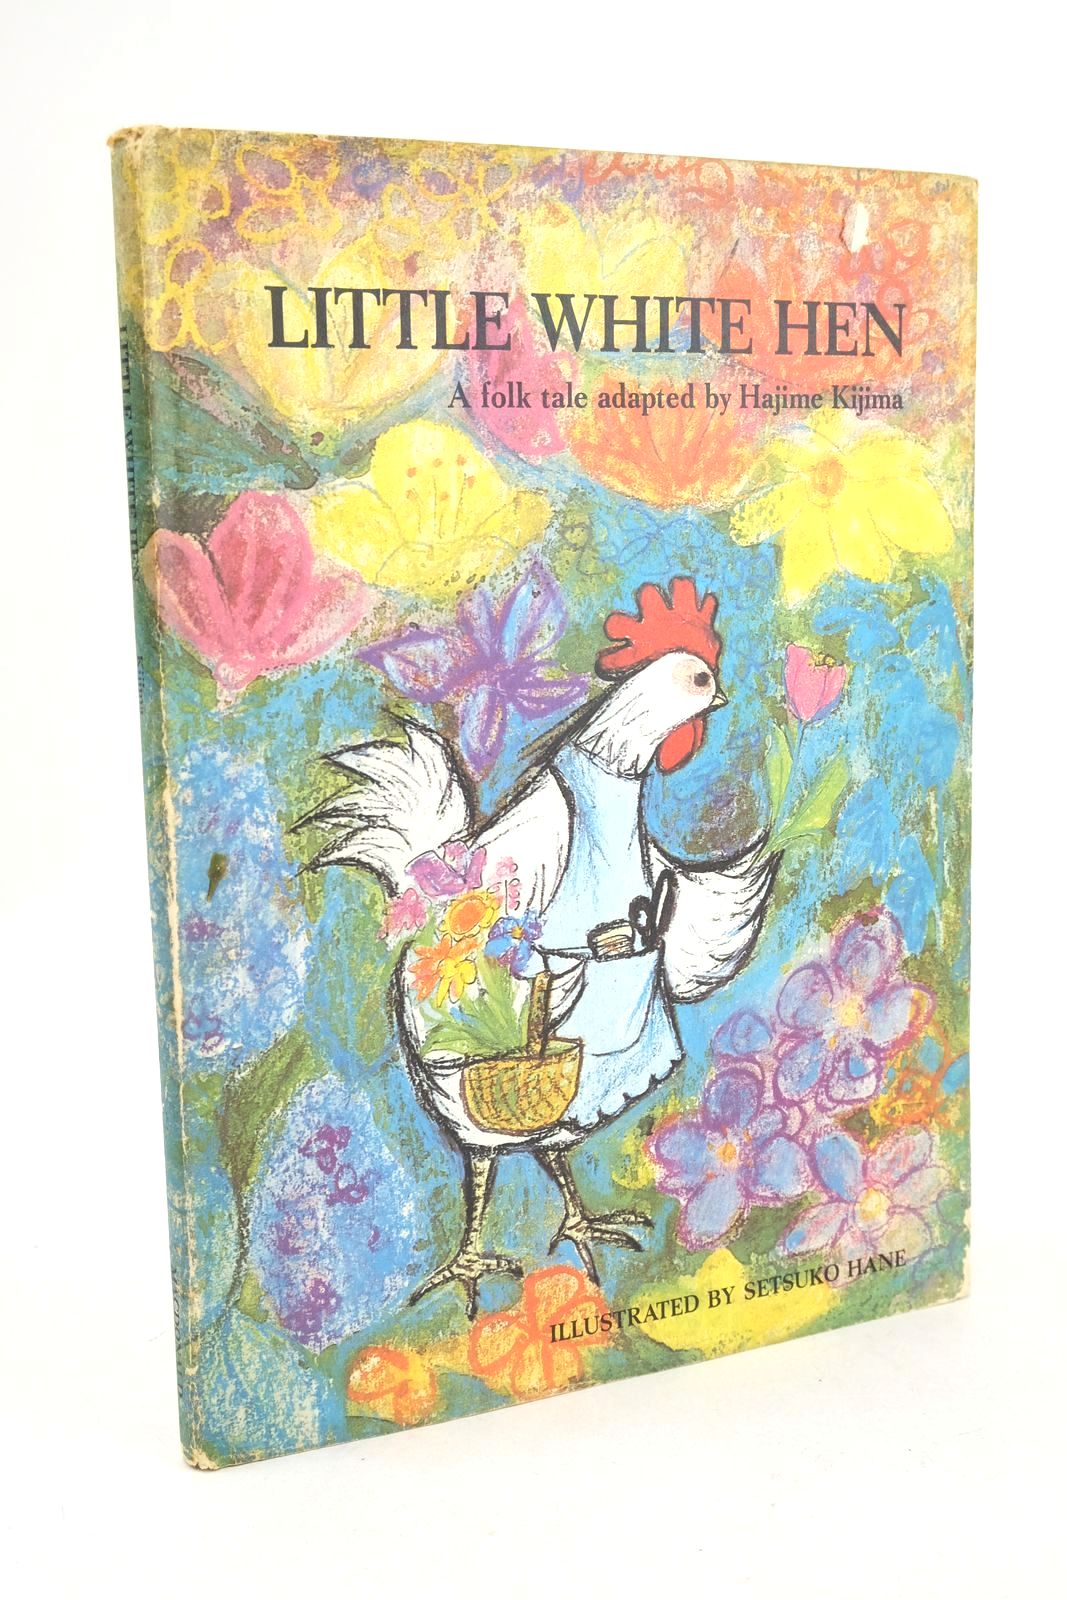 Photo of LITTLE WHITE HEN written by Kijima, Hajime illustrated by Hane, Setsuko published by Macdonald & Co. (Publishers) Ltd. (STOCK CODE: 1325614)  for sale by Stella & Rose's Books